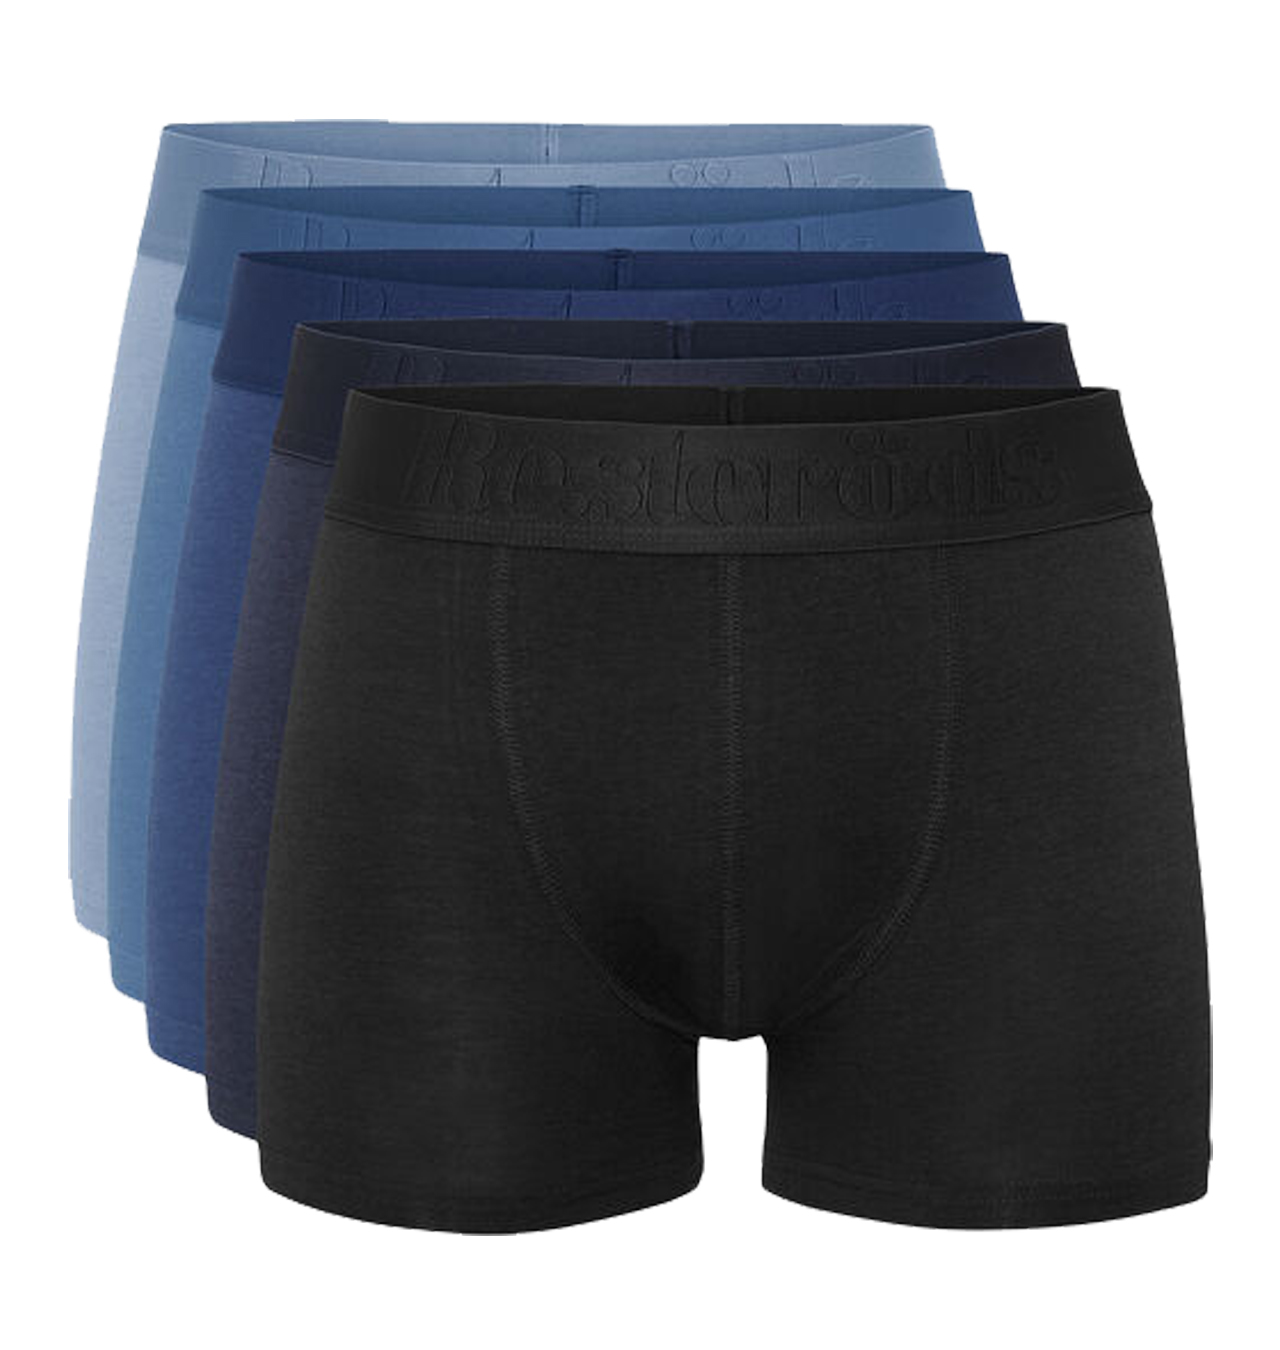 Resterods---Boxer-Bamboo-5-pack-(Multi-17)---Mixed-Colors